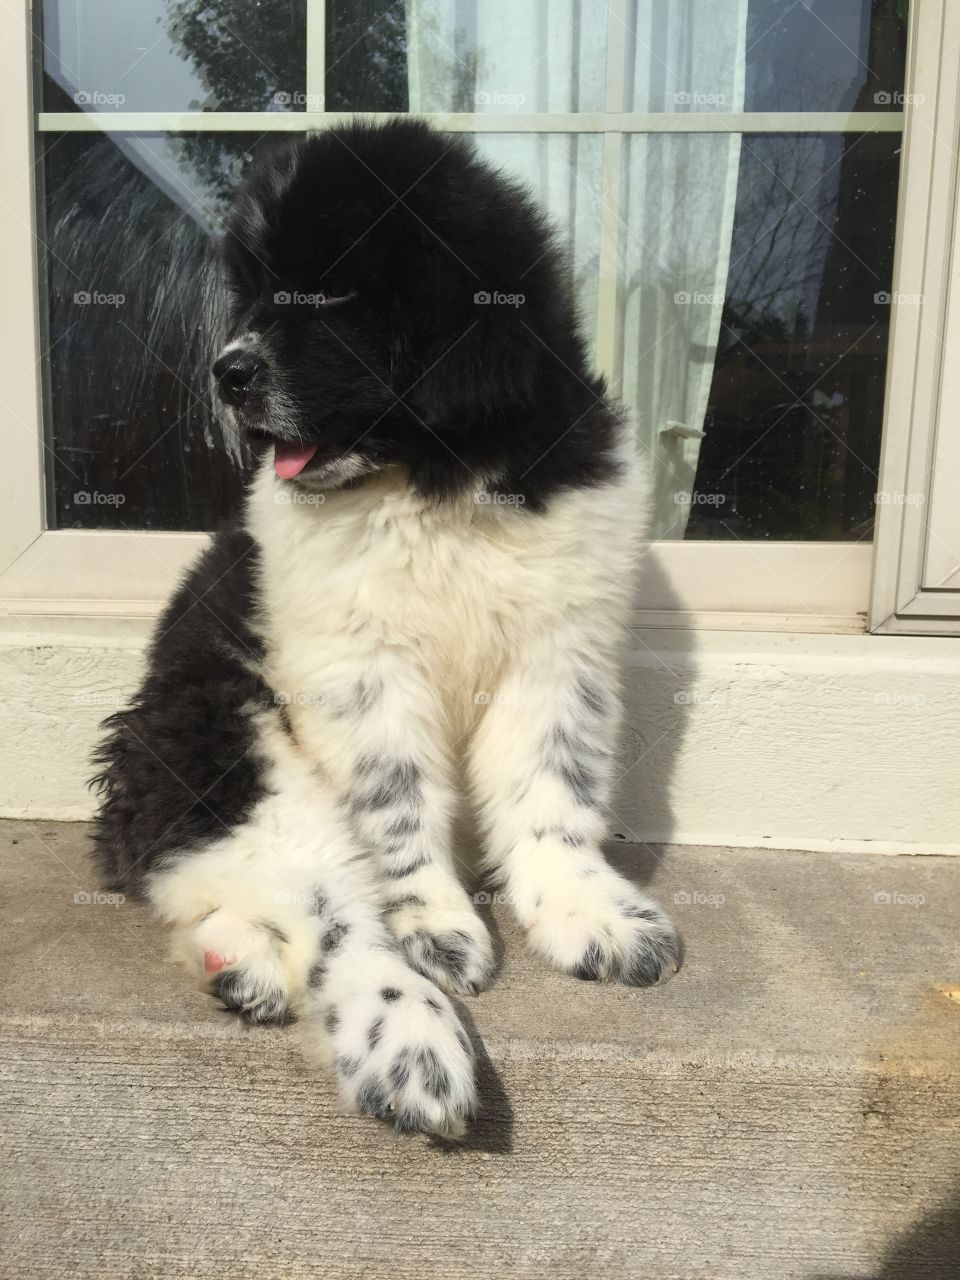 Newfoundland puppy. First day our Newfoundland came home to us and the whole family fell in love with him